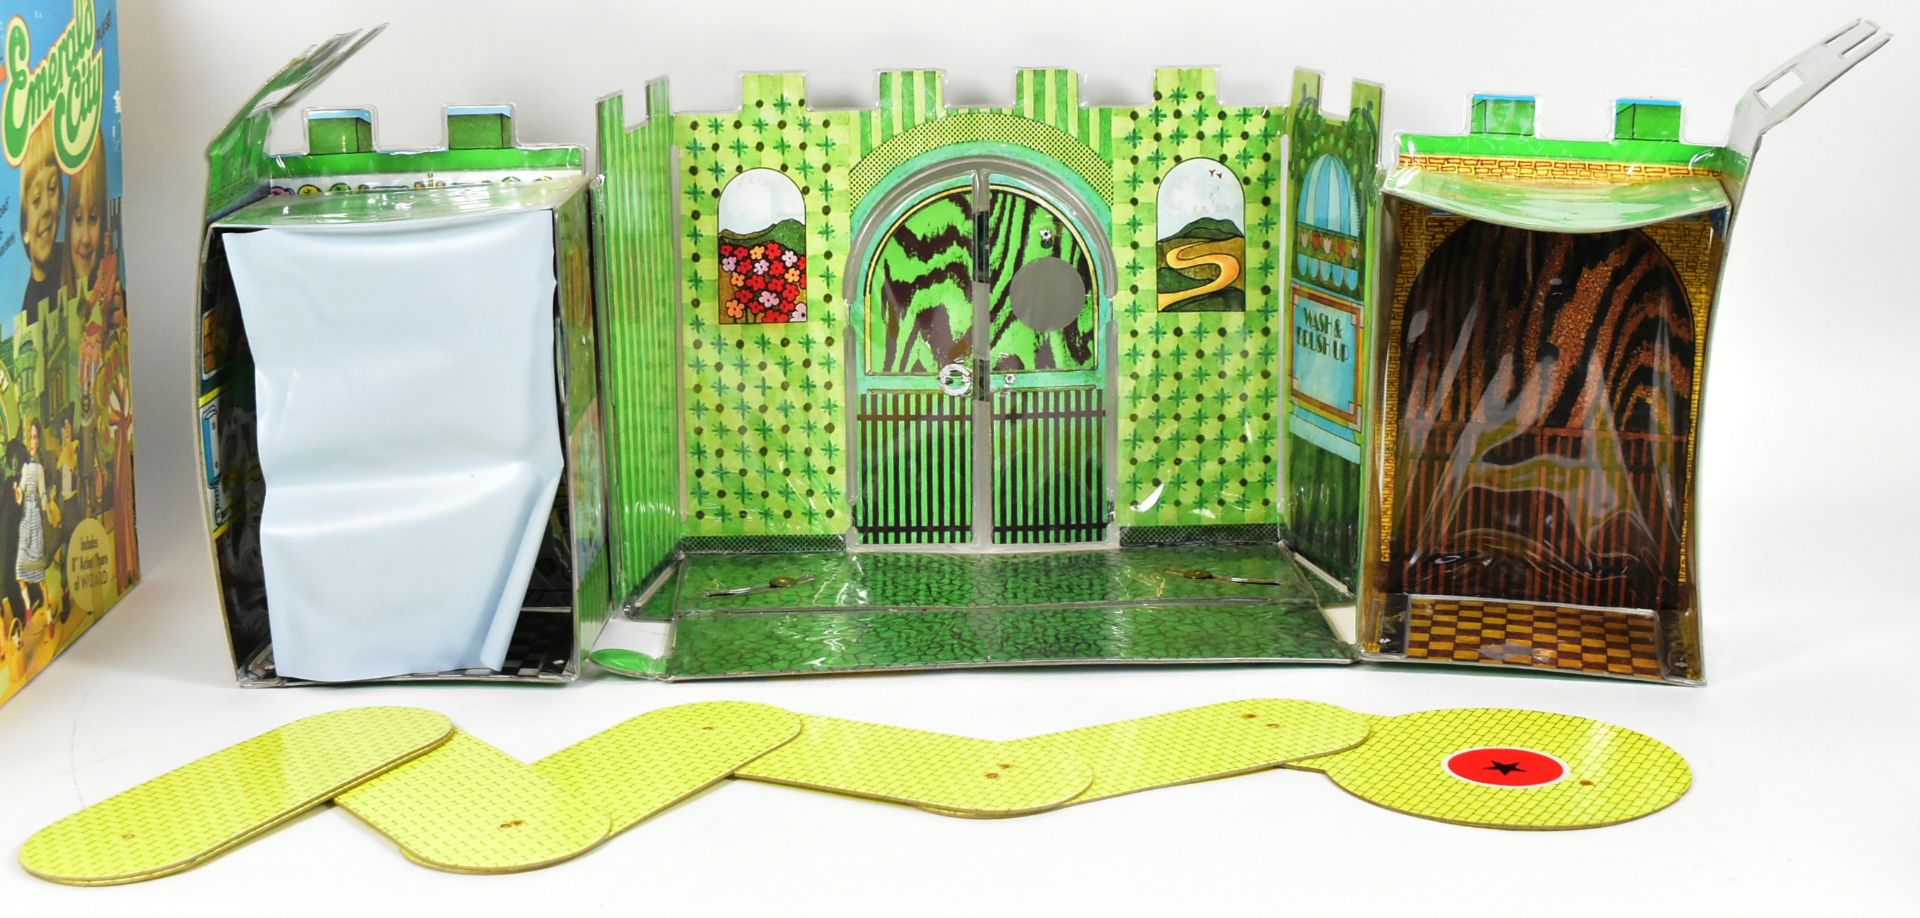 THE WIZARD OF OZ - MEGO - EMERALD CITY PLAYSET - Image 5 of 5